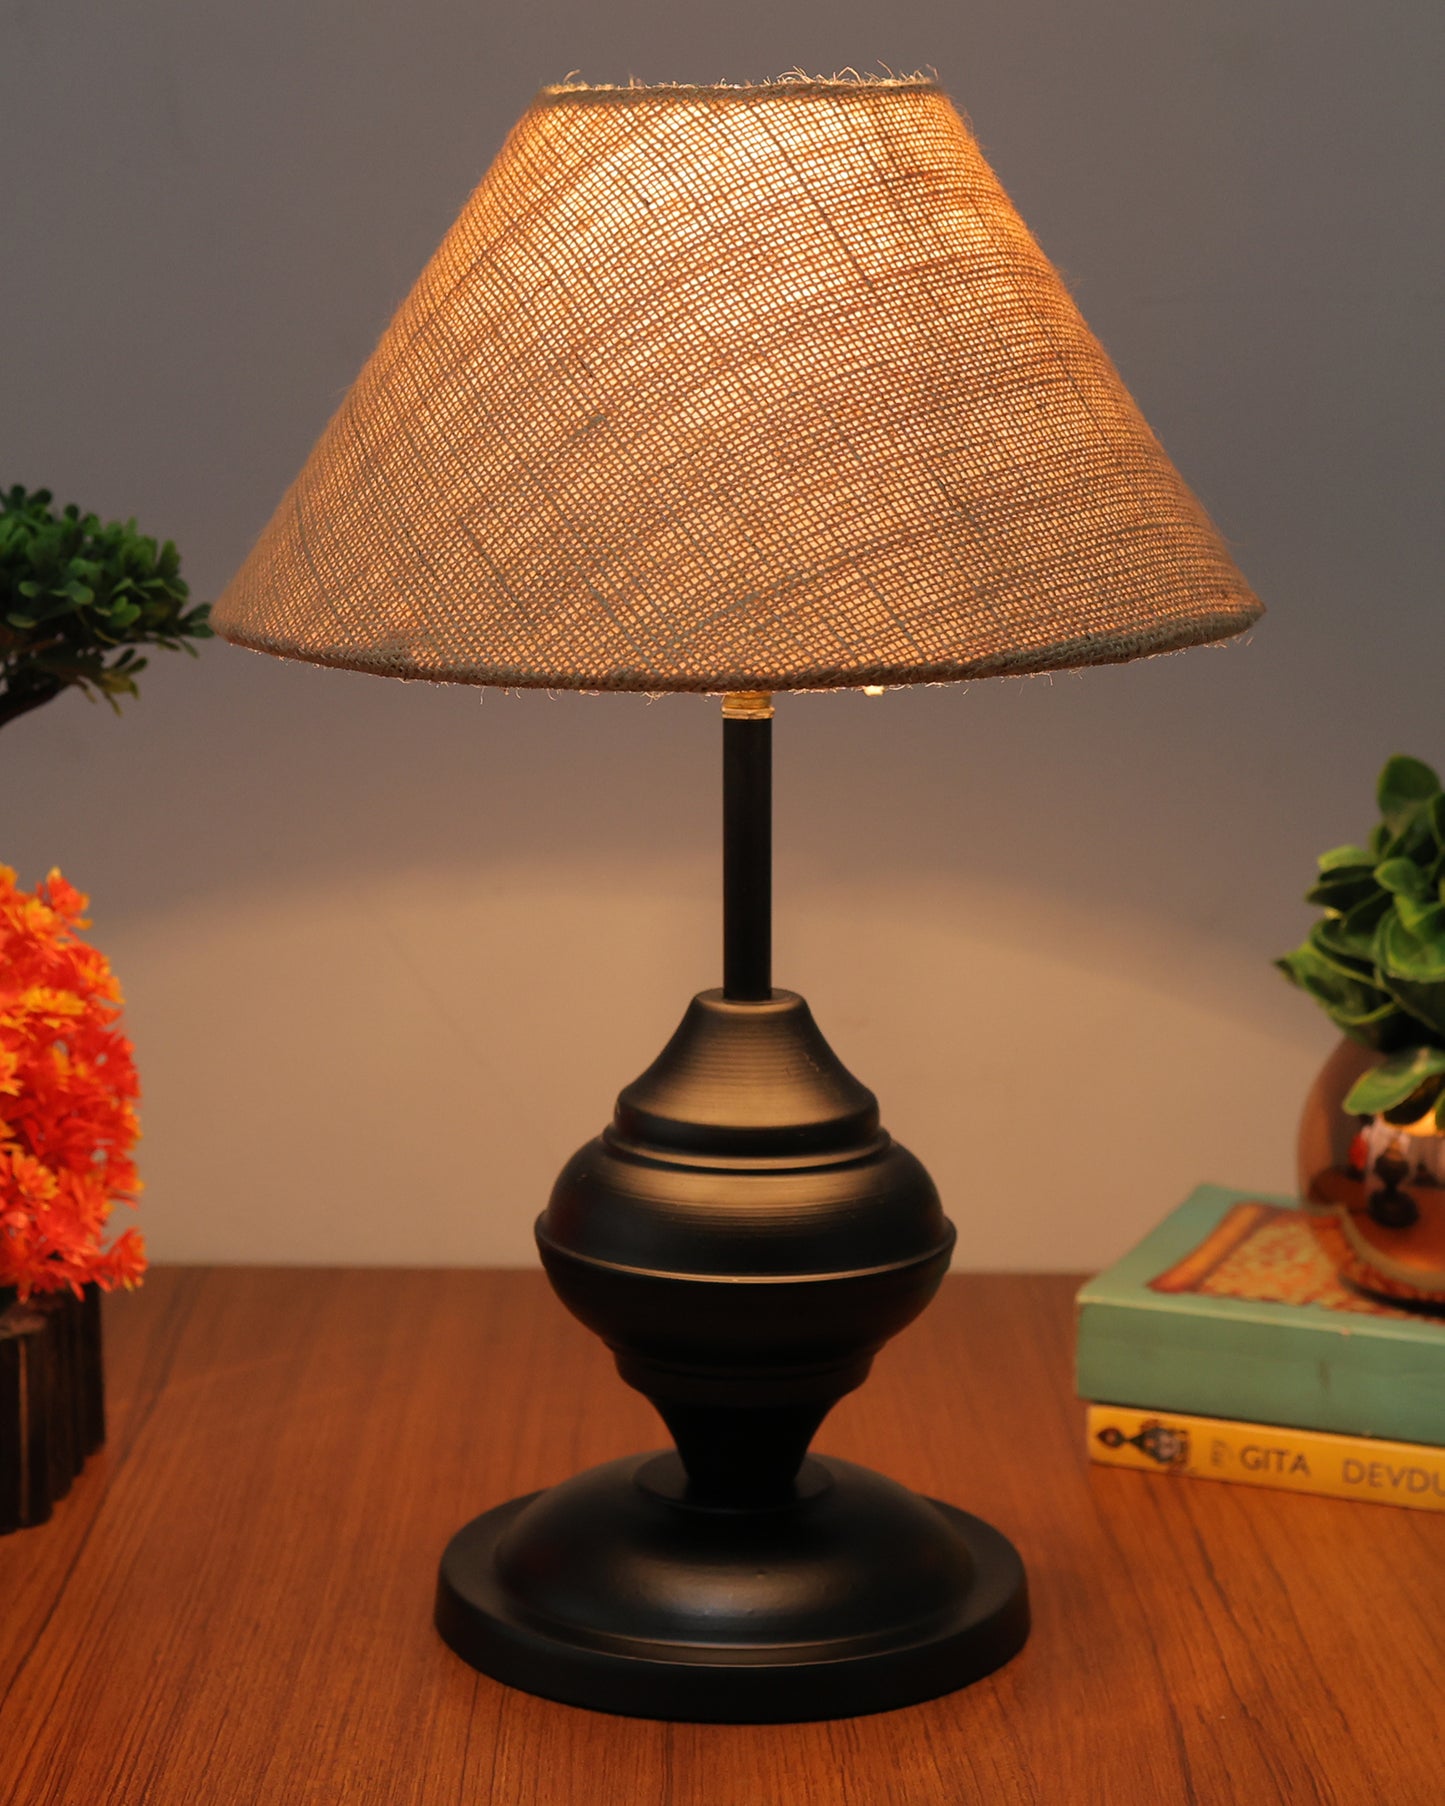 Black Metal Urn Table Lamp with Fabric Shade, B22 holder Nightstand Lamp